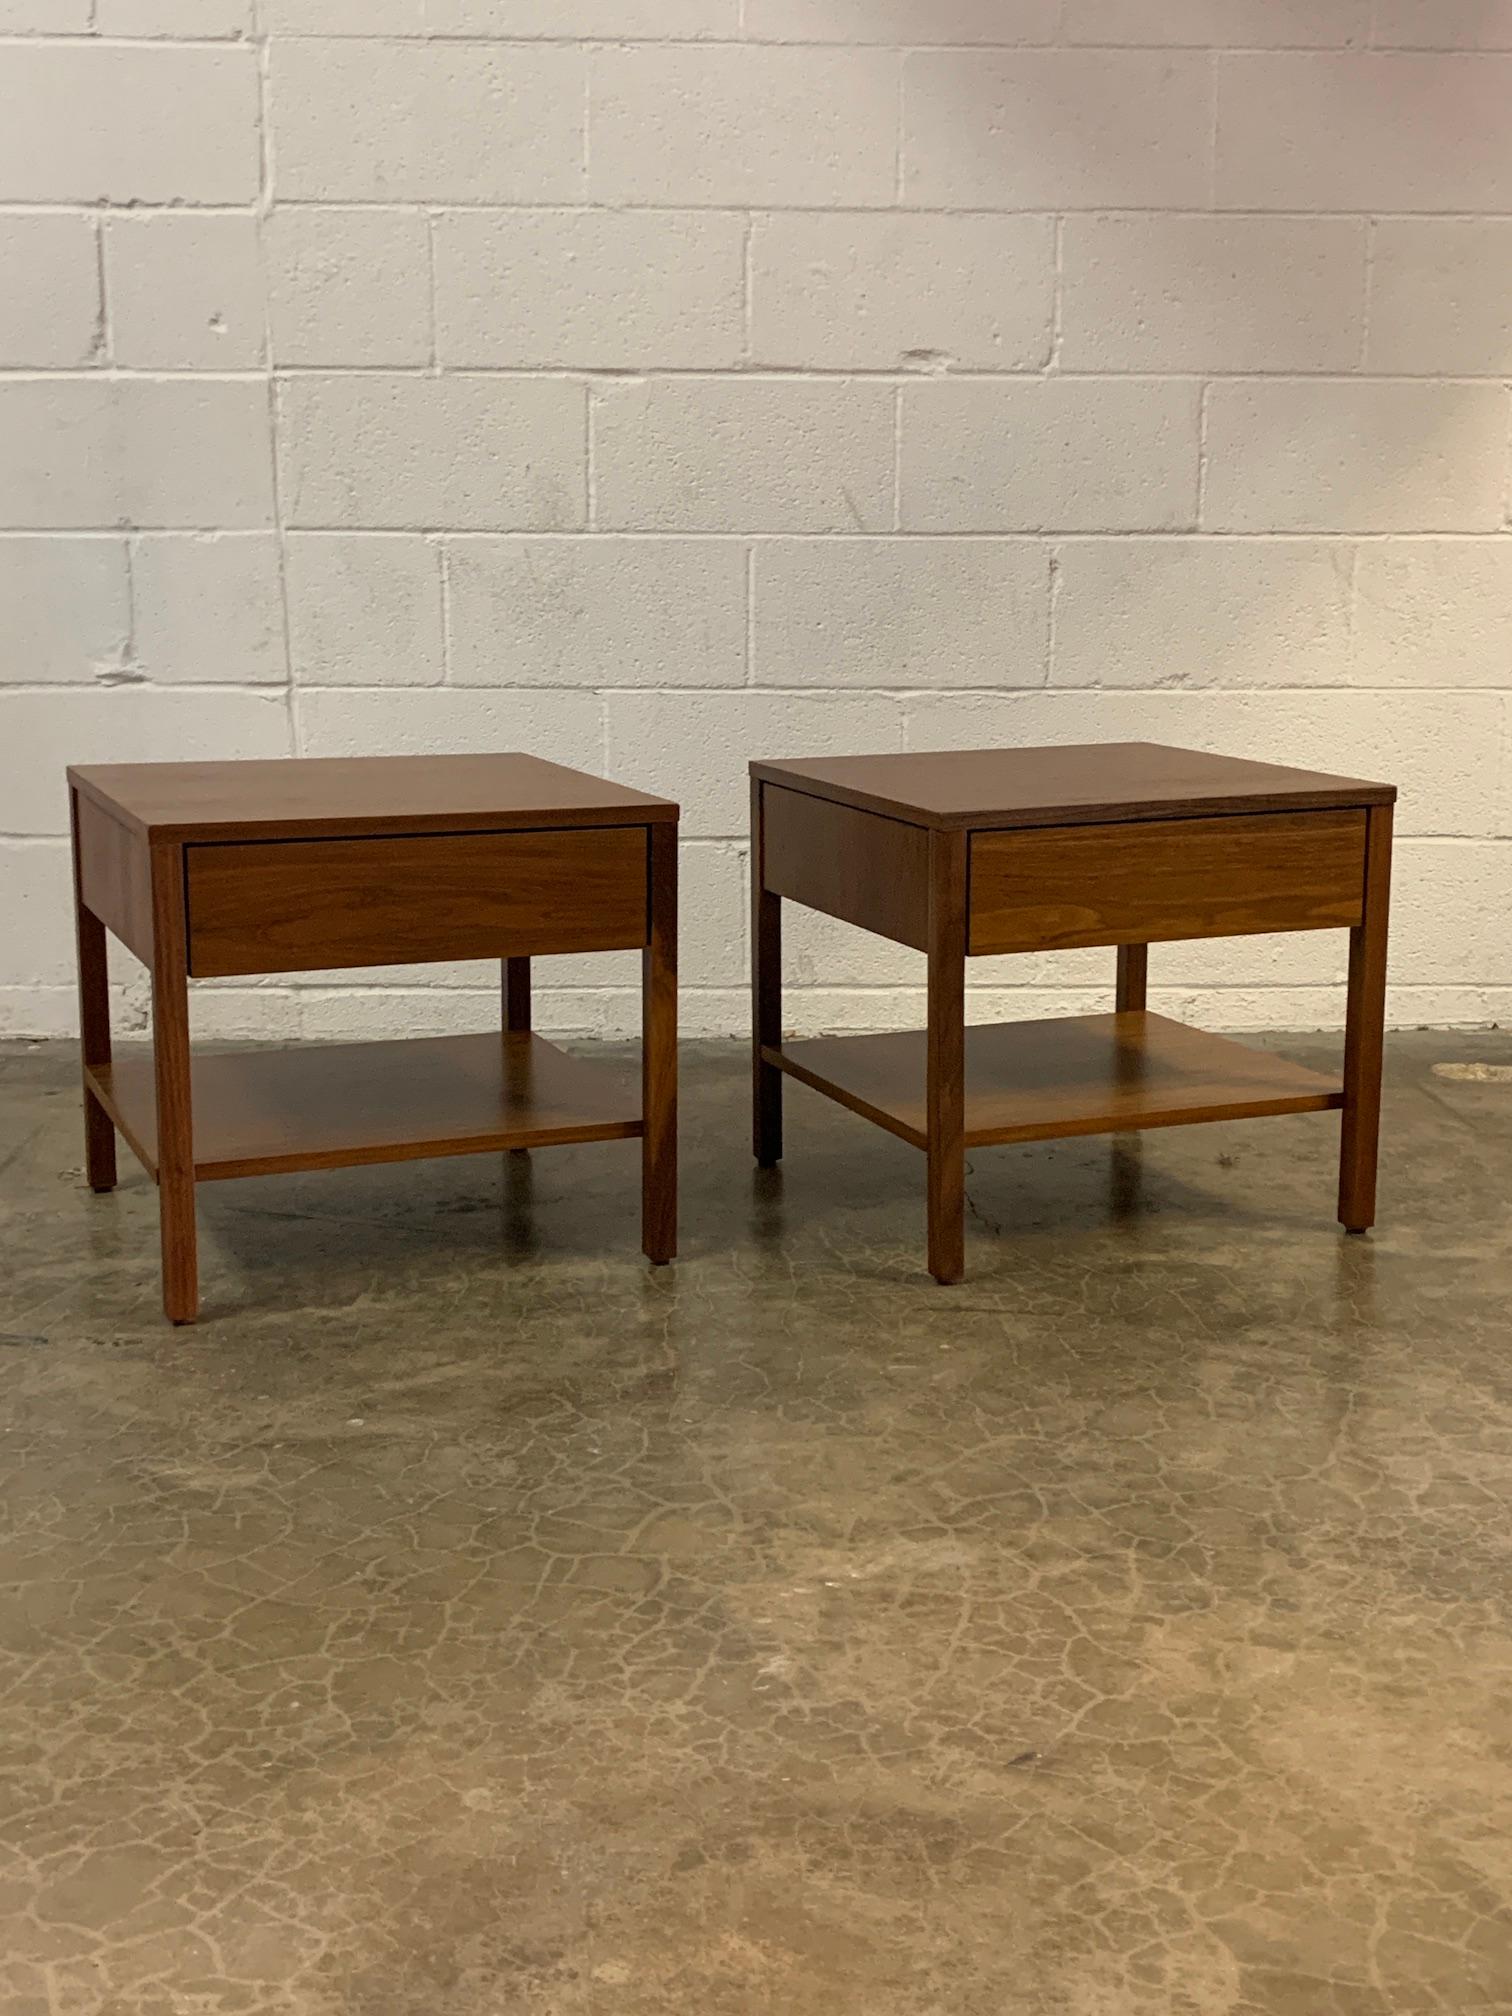 A pair of walnut nightstands designed by Florence Knoll for Knoll.